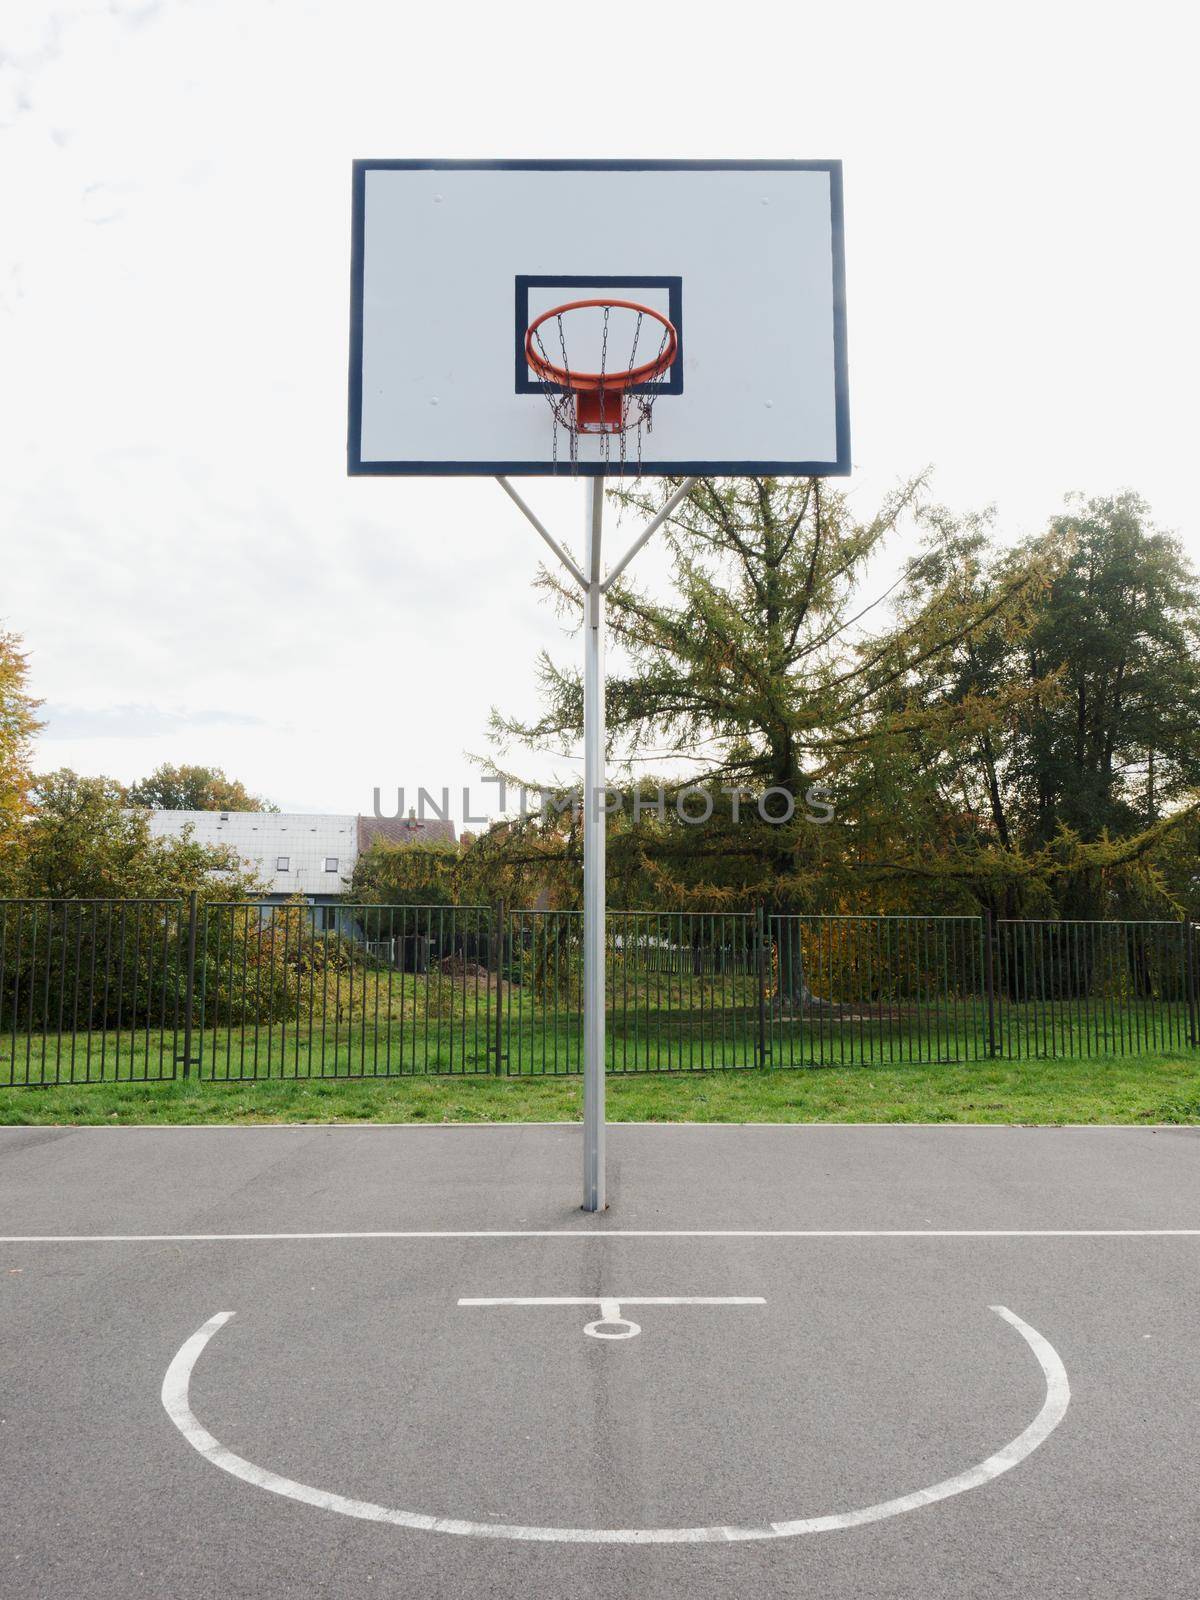 Basketball hoop and a cage with poor asphalt, sports background